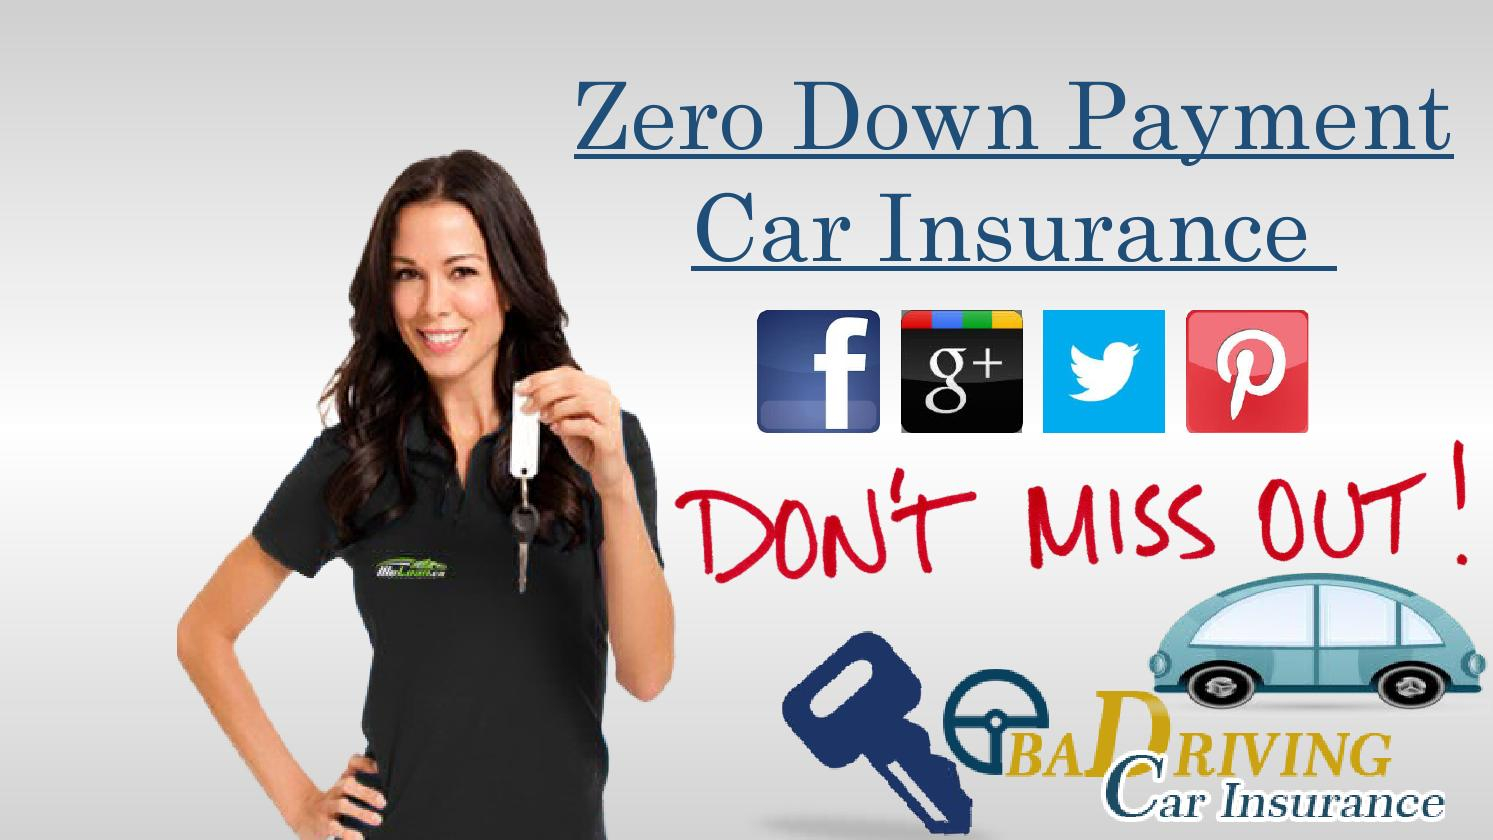 Get Car Insurance With Zero Down Payment Lowest Rates On regarding dimensions 1493 X 840